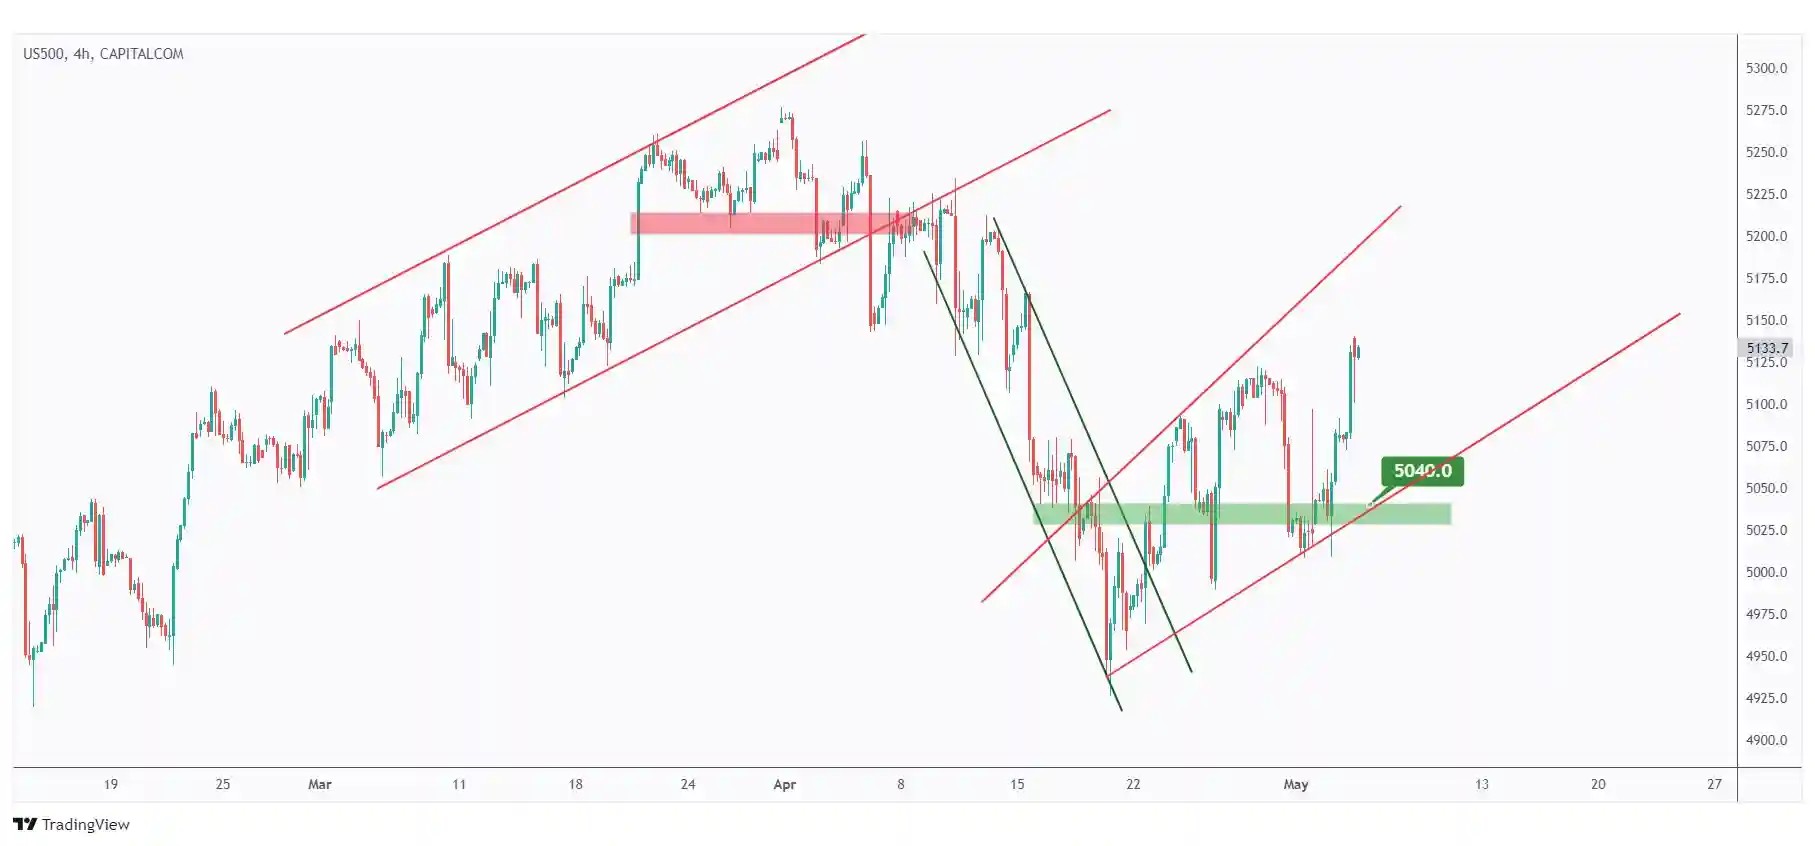 US500 4h chart overall bullish medium-term trading within the rising channel as long as the last low at $5040 holds.